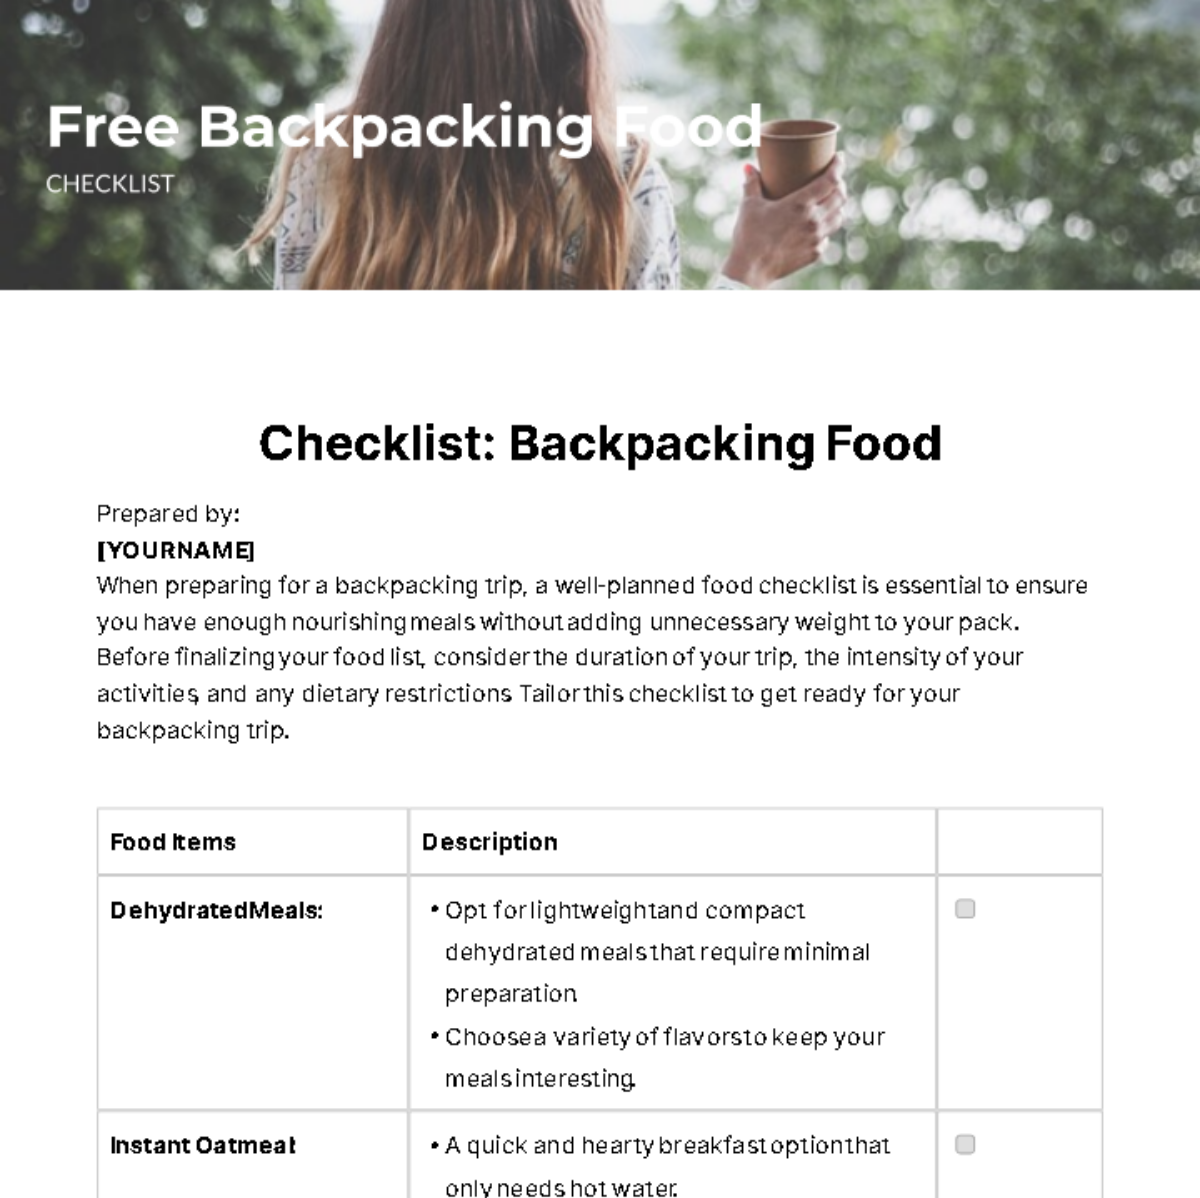 Free Backpacking Food Checklist Template